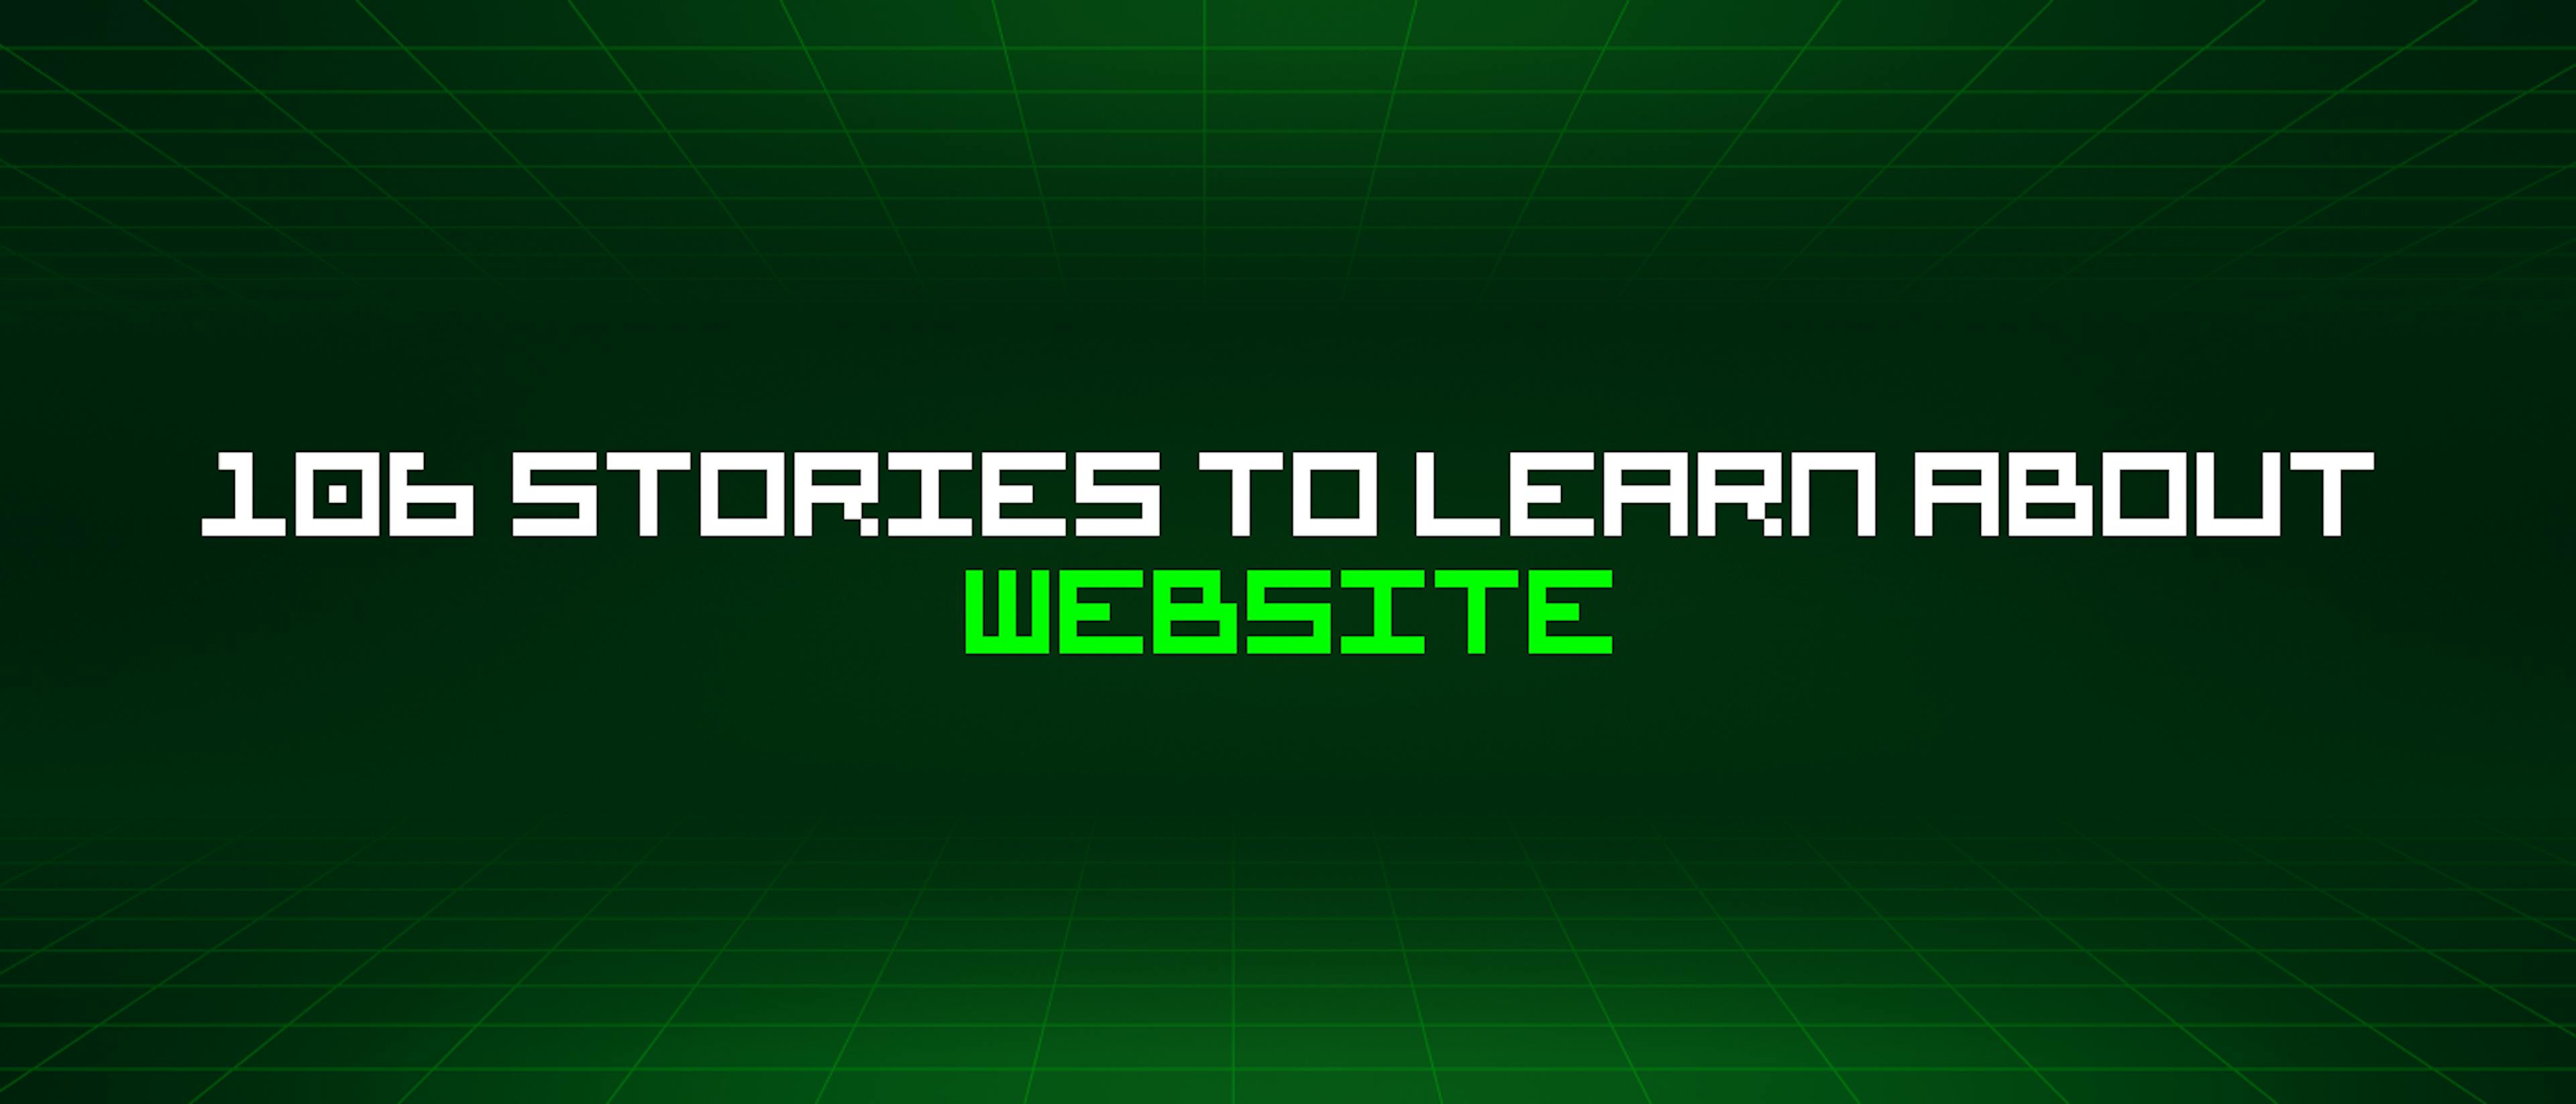 featured image - 106 Stories To Learn About Website